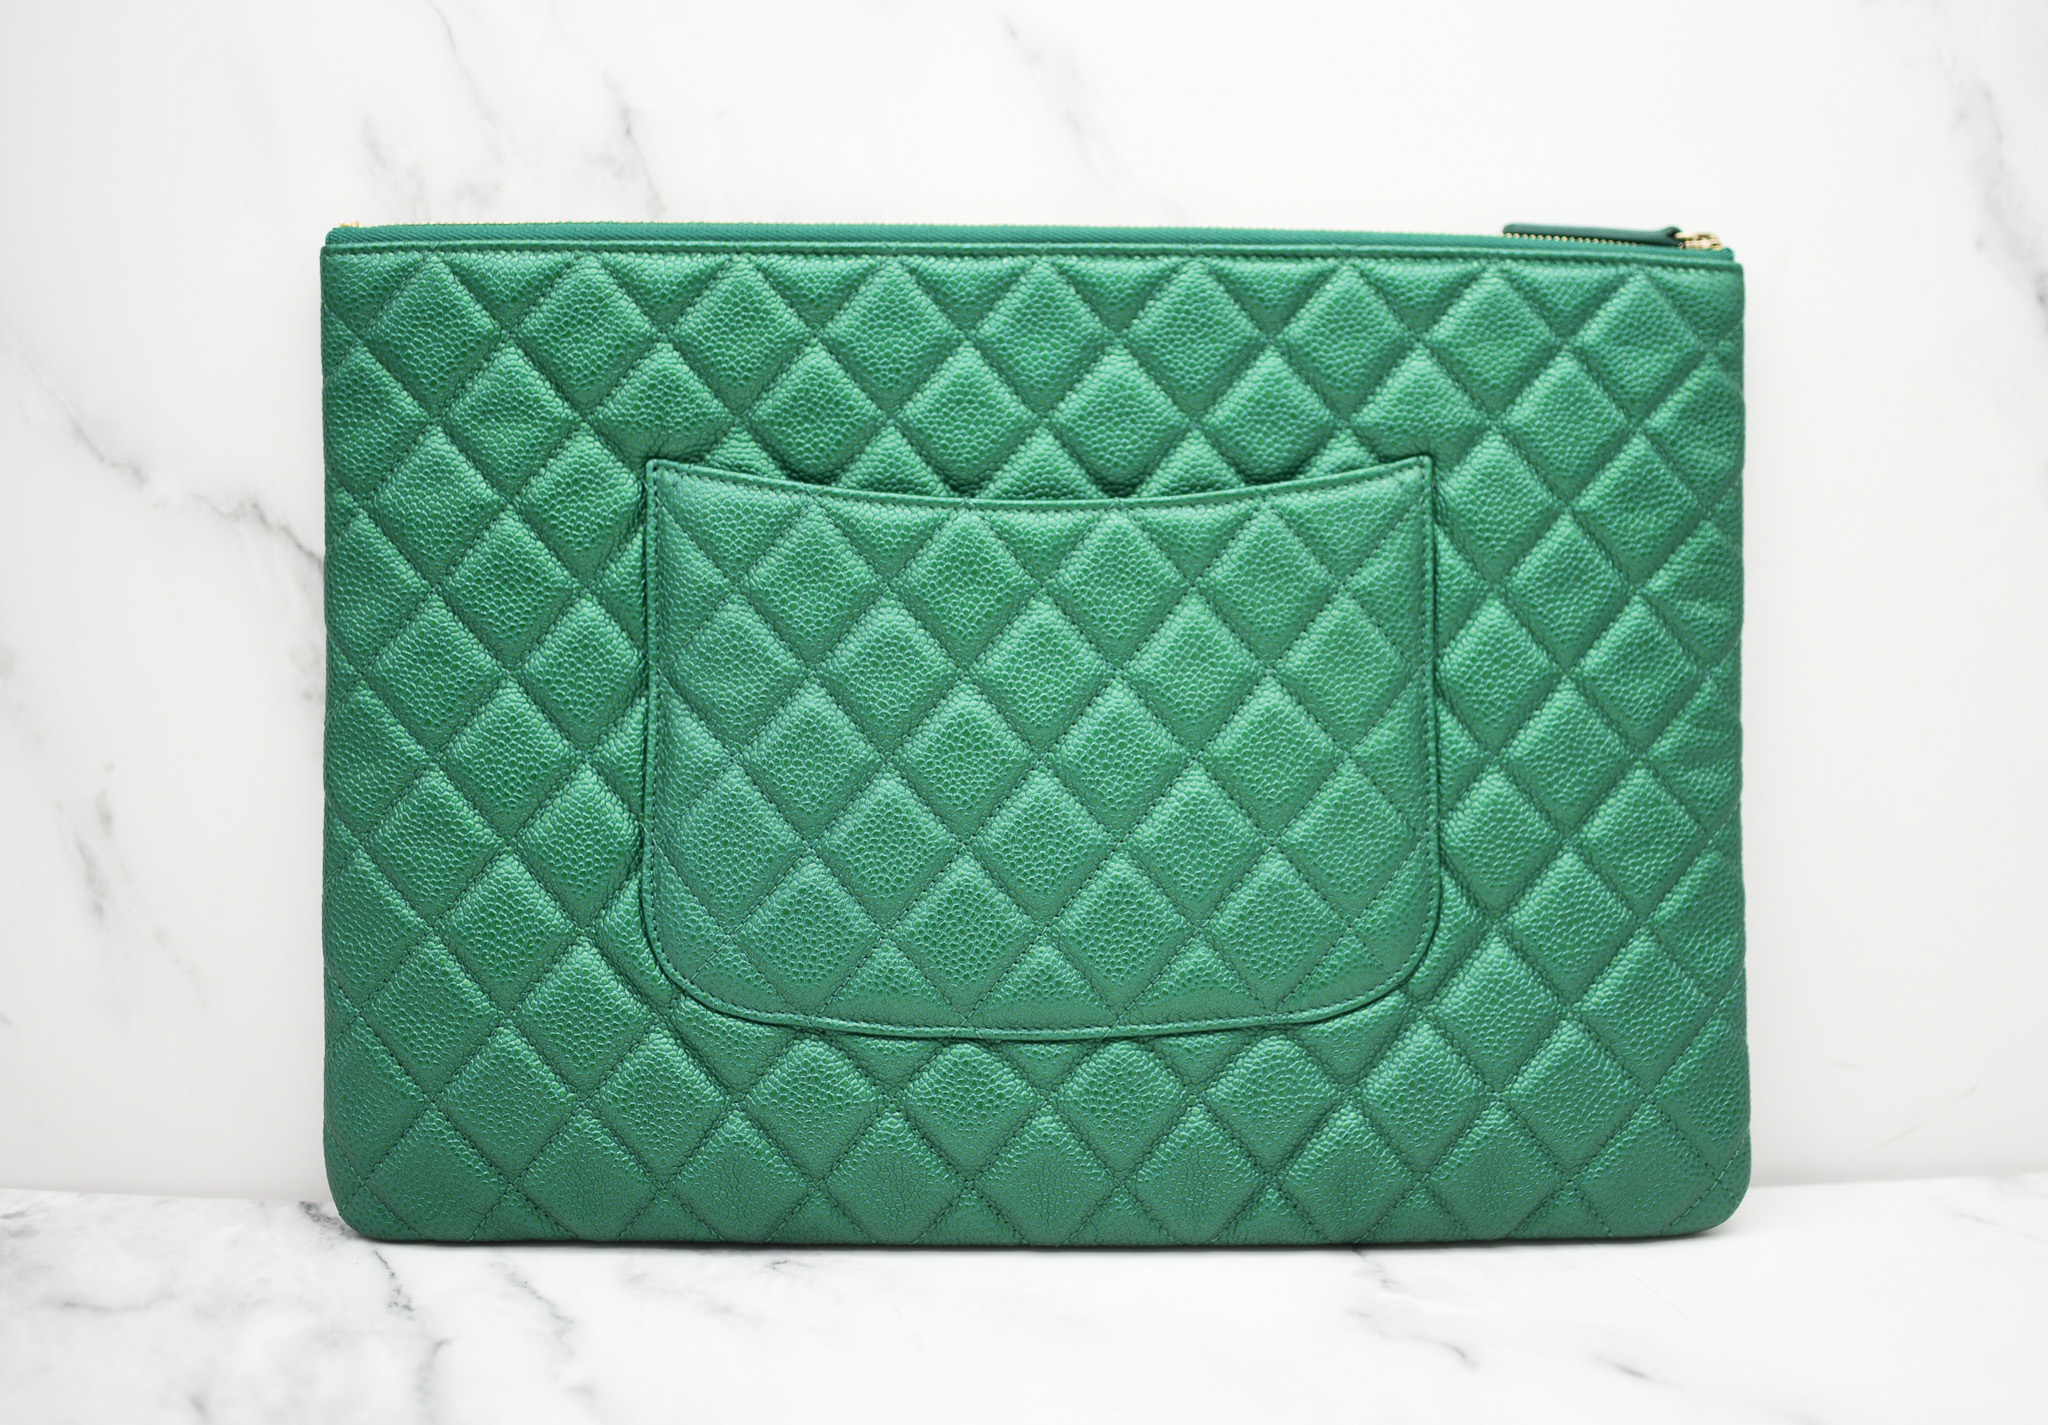 Chanel Large O Case, 18S Emerald Green Caviar Leather, Gold Hardware,  Preowned with Box GA001